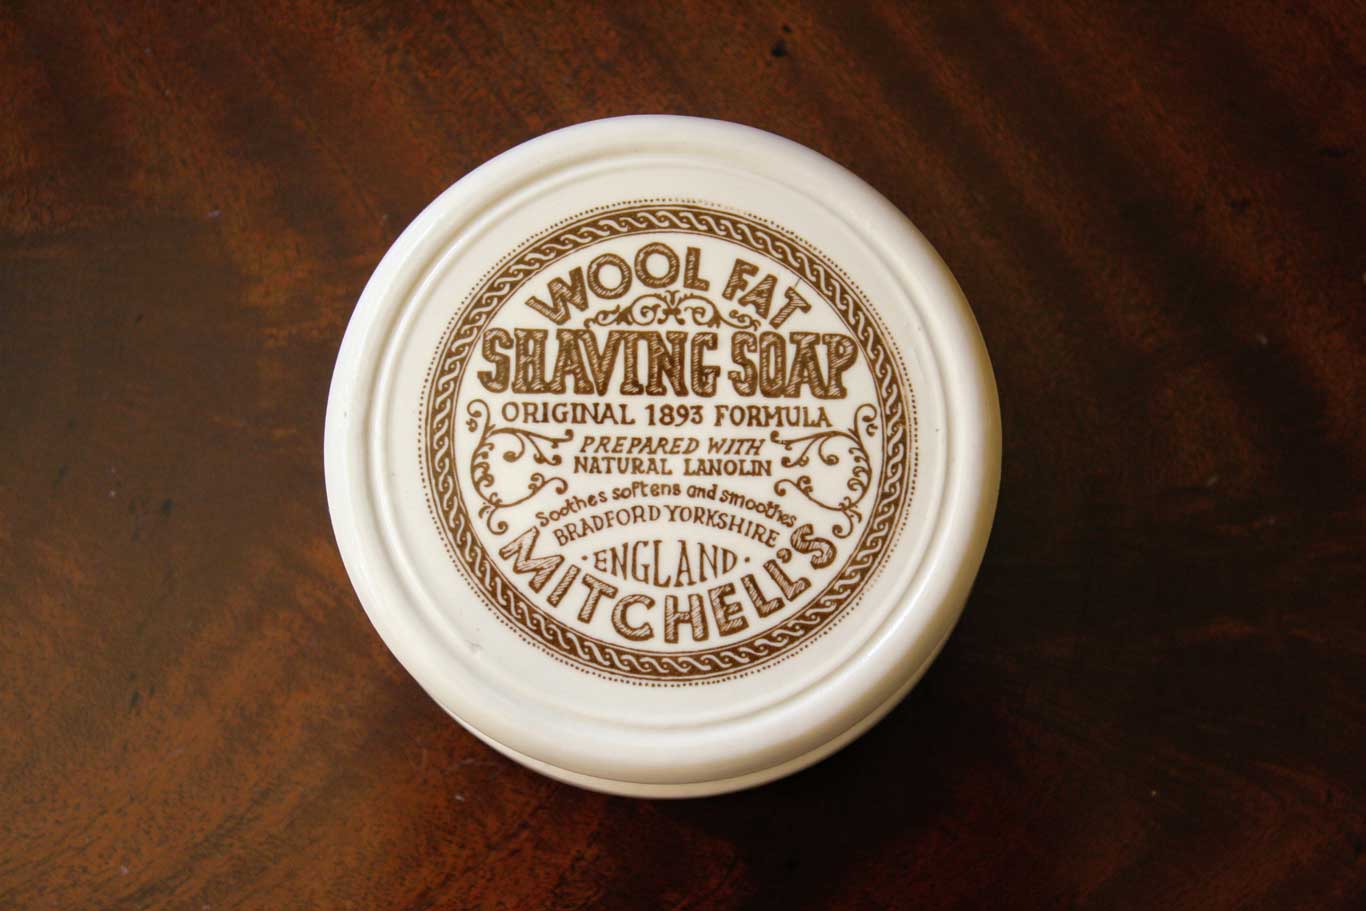 Mitchell's Wool Fat Shaving Soap Review